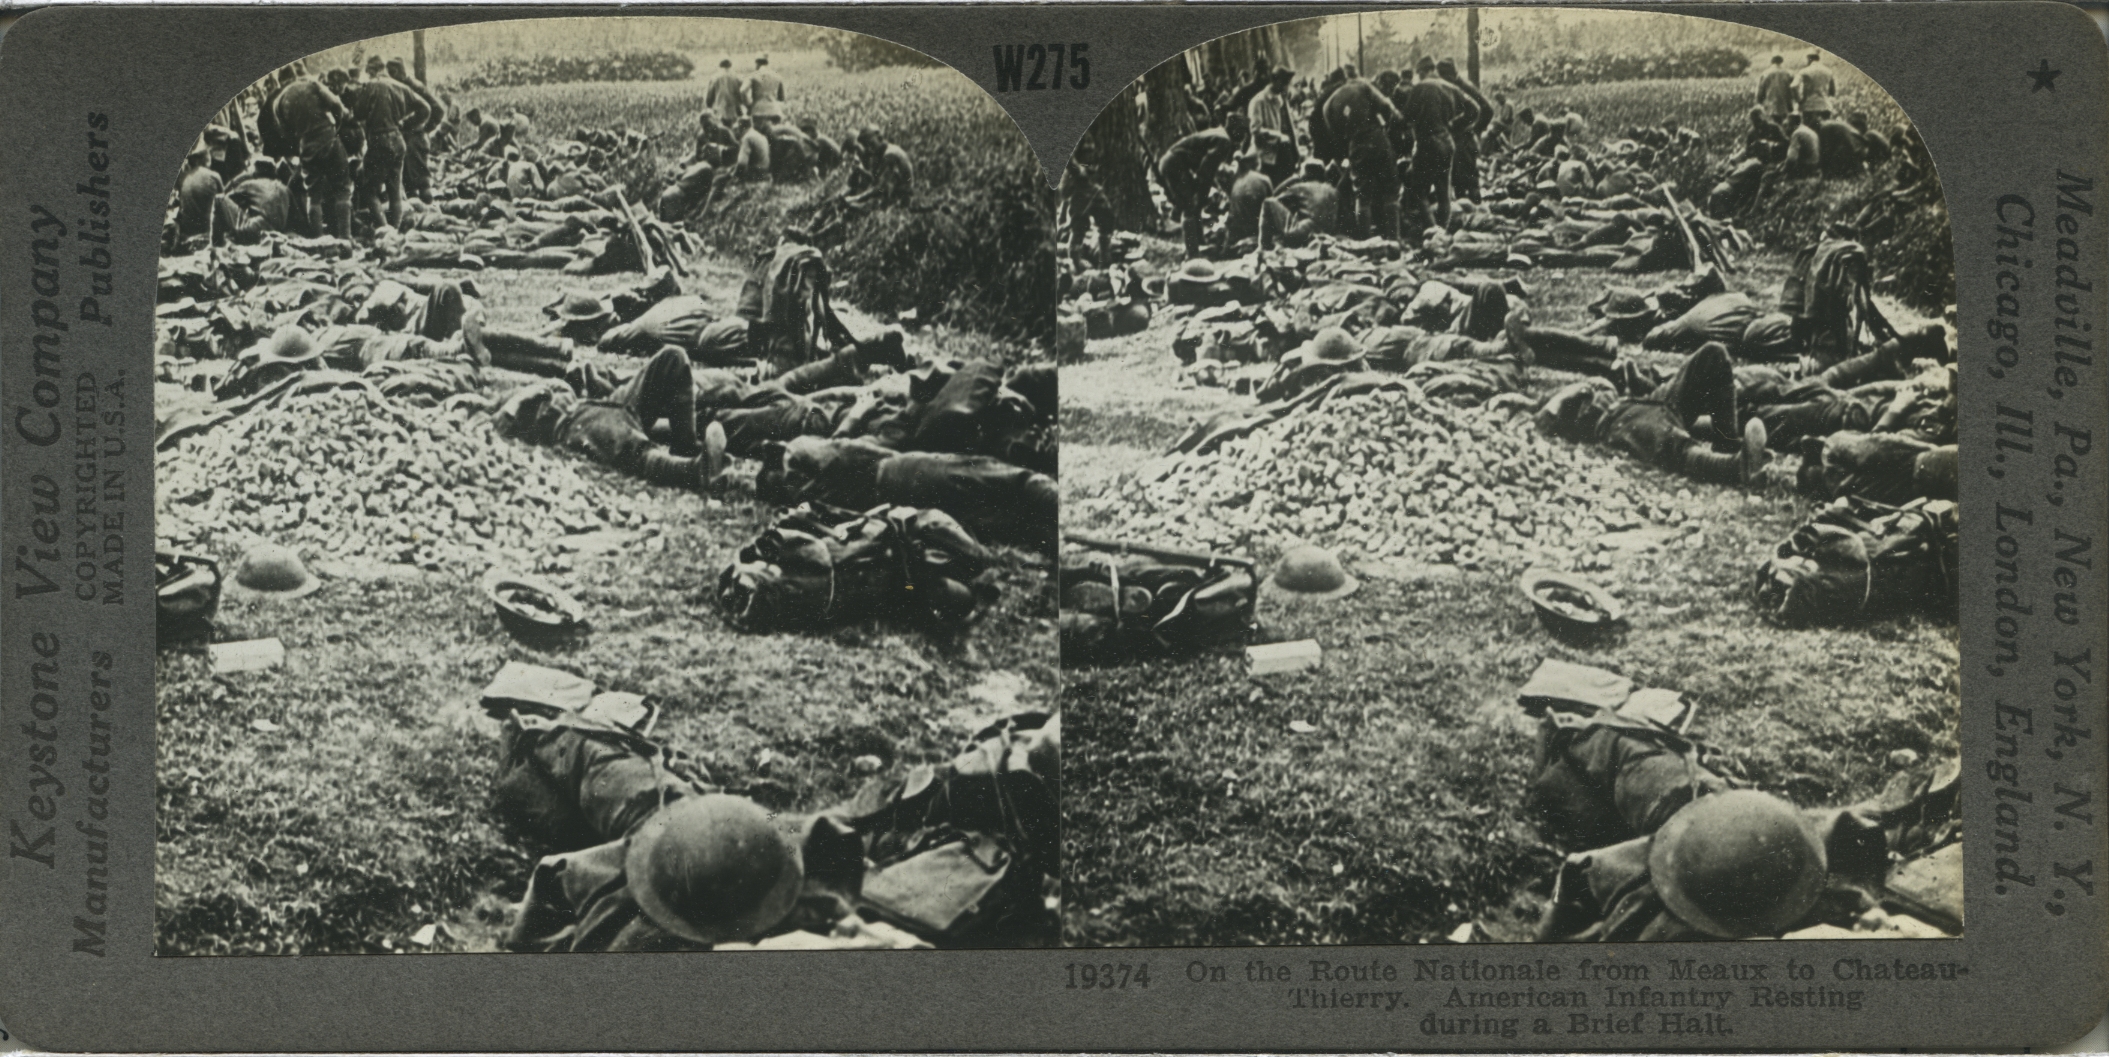 On the Route Nationale from Meaux to Chateau-Thierry. American infantry Resting during a Brief Halt